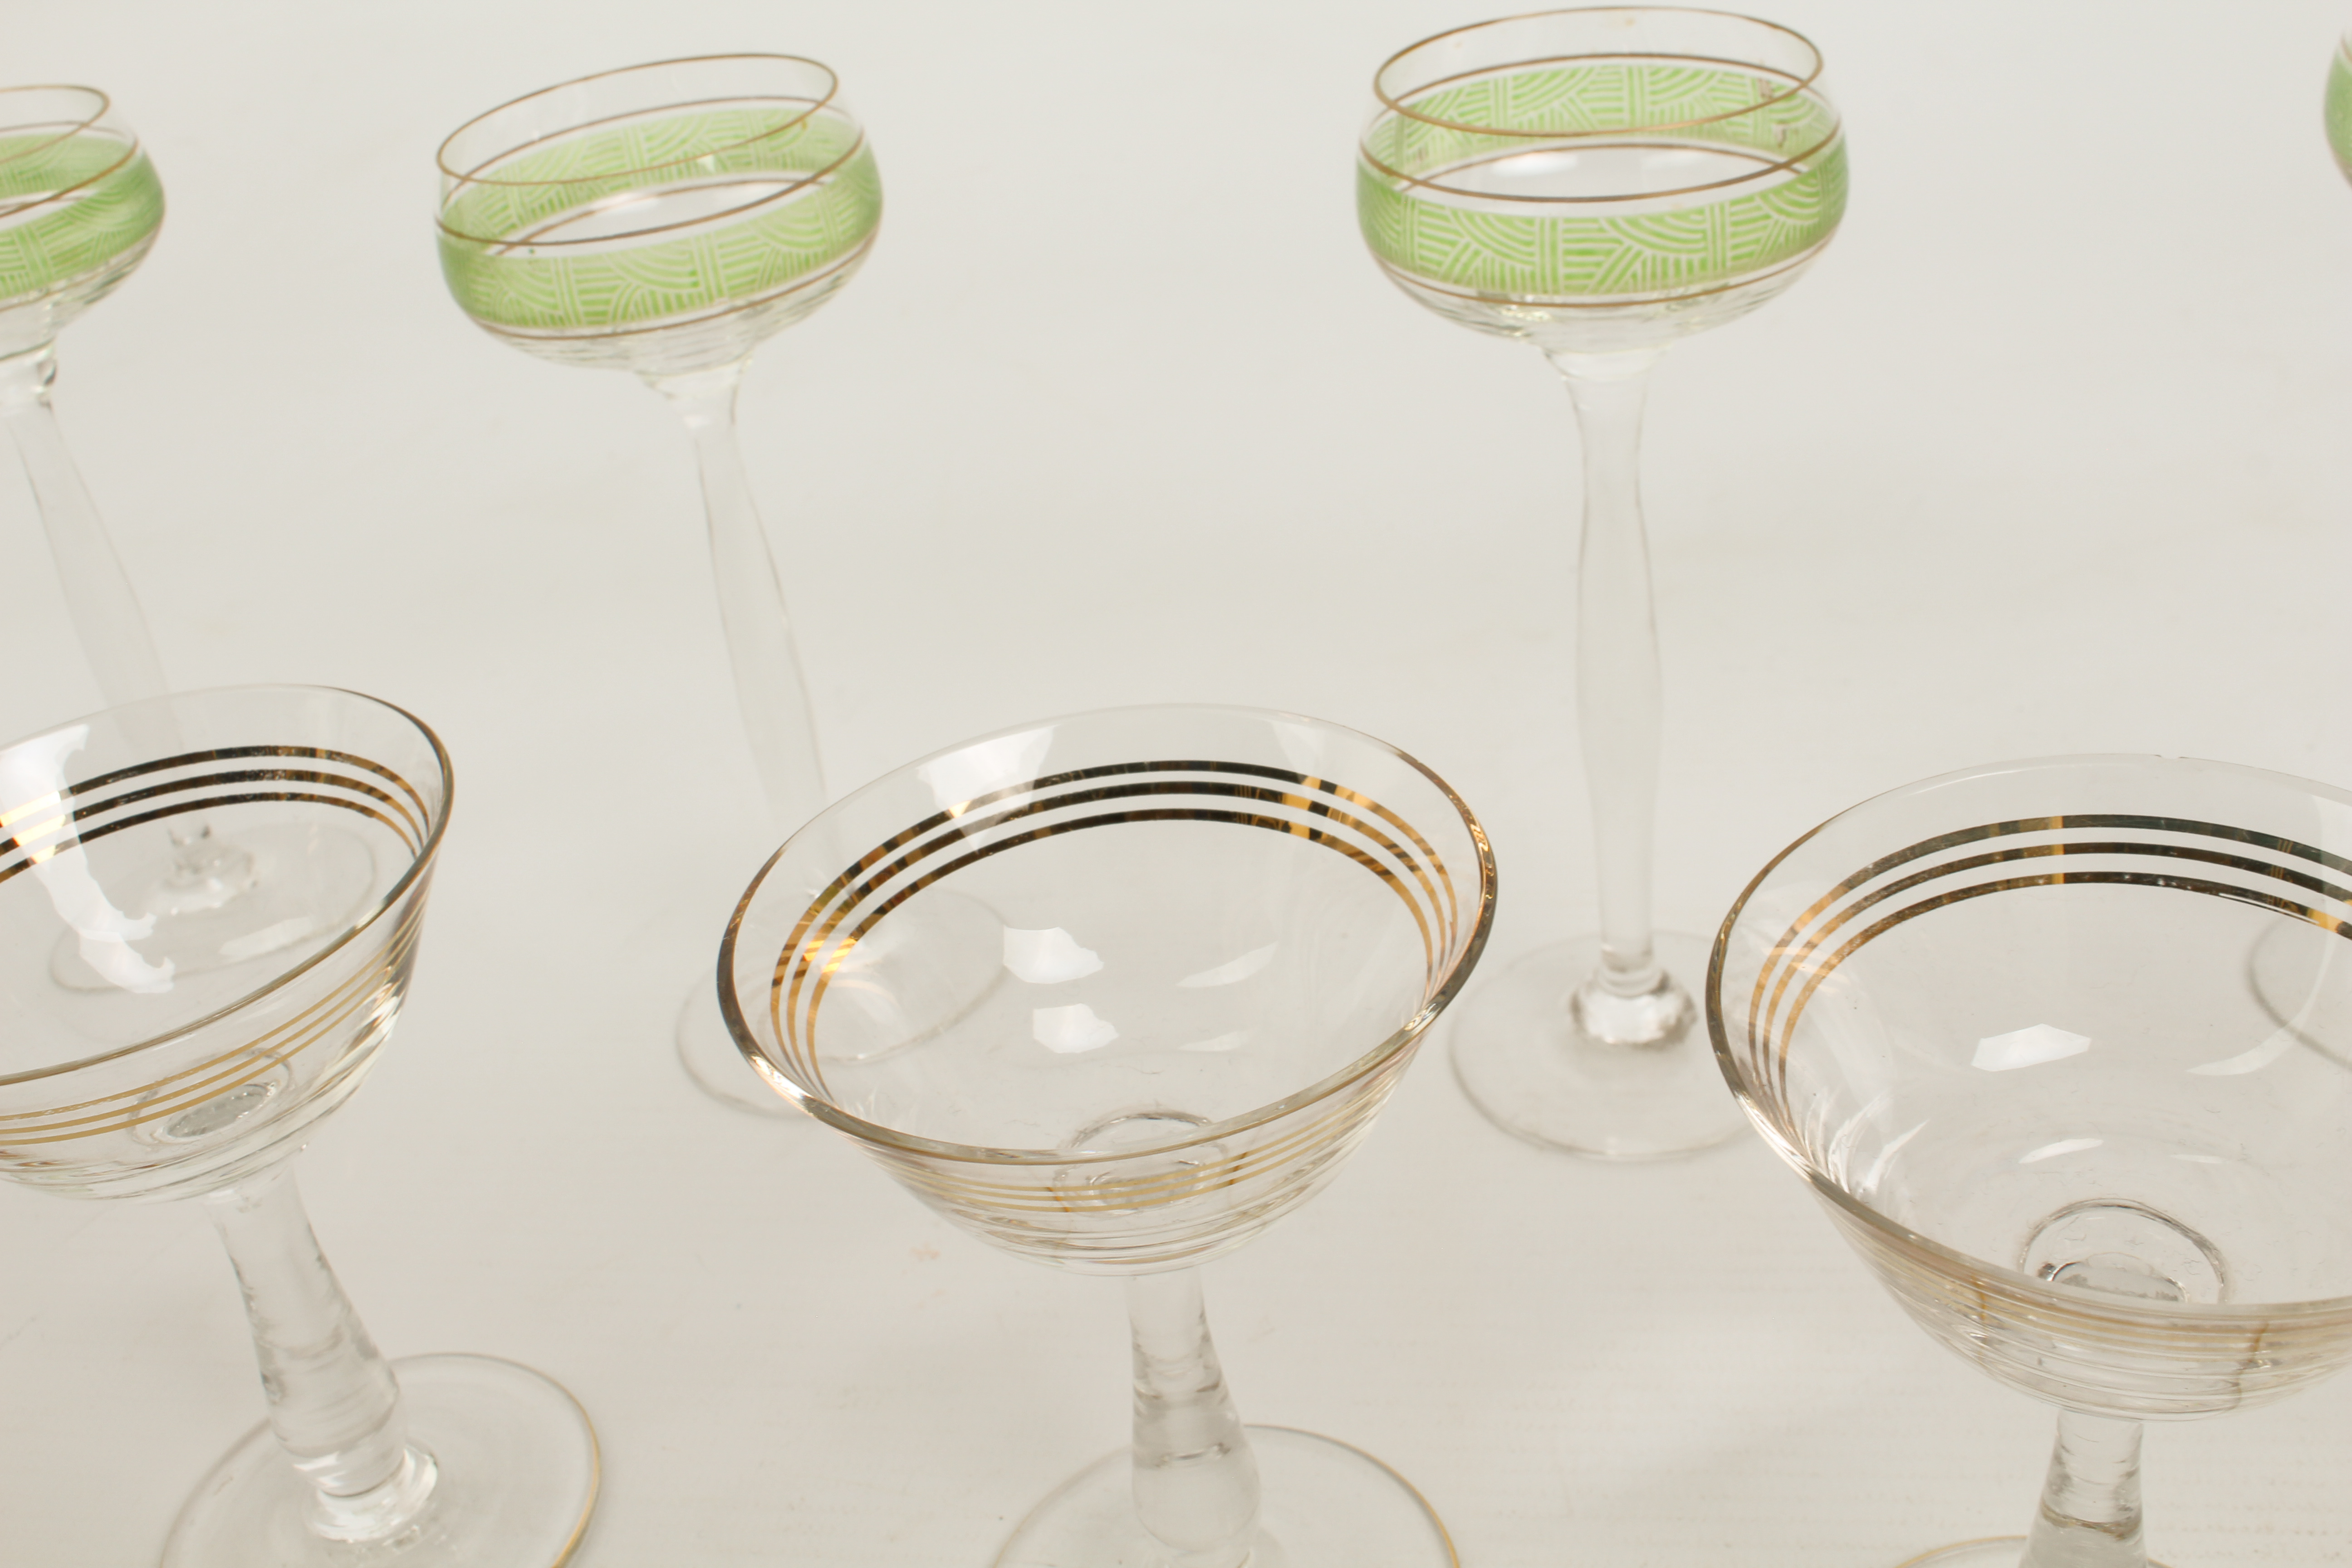 A set of four Secessionist-style tall liqueur glasses in the style of Peter Behrens - the shallow, - Image 2 of 2